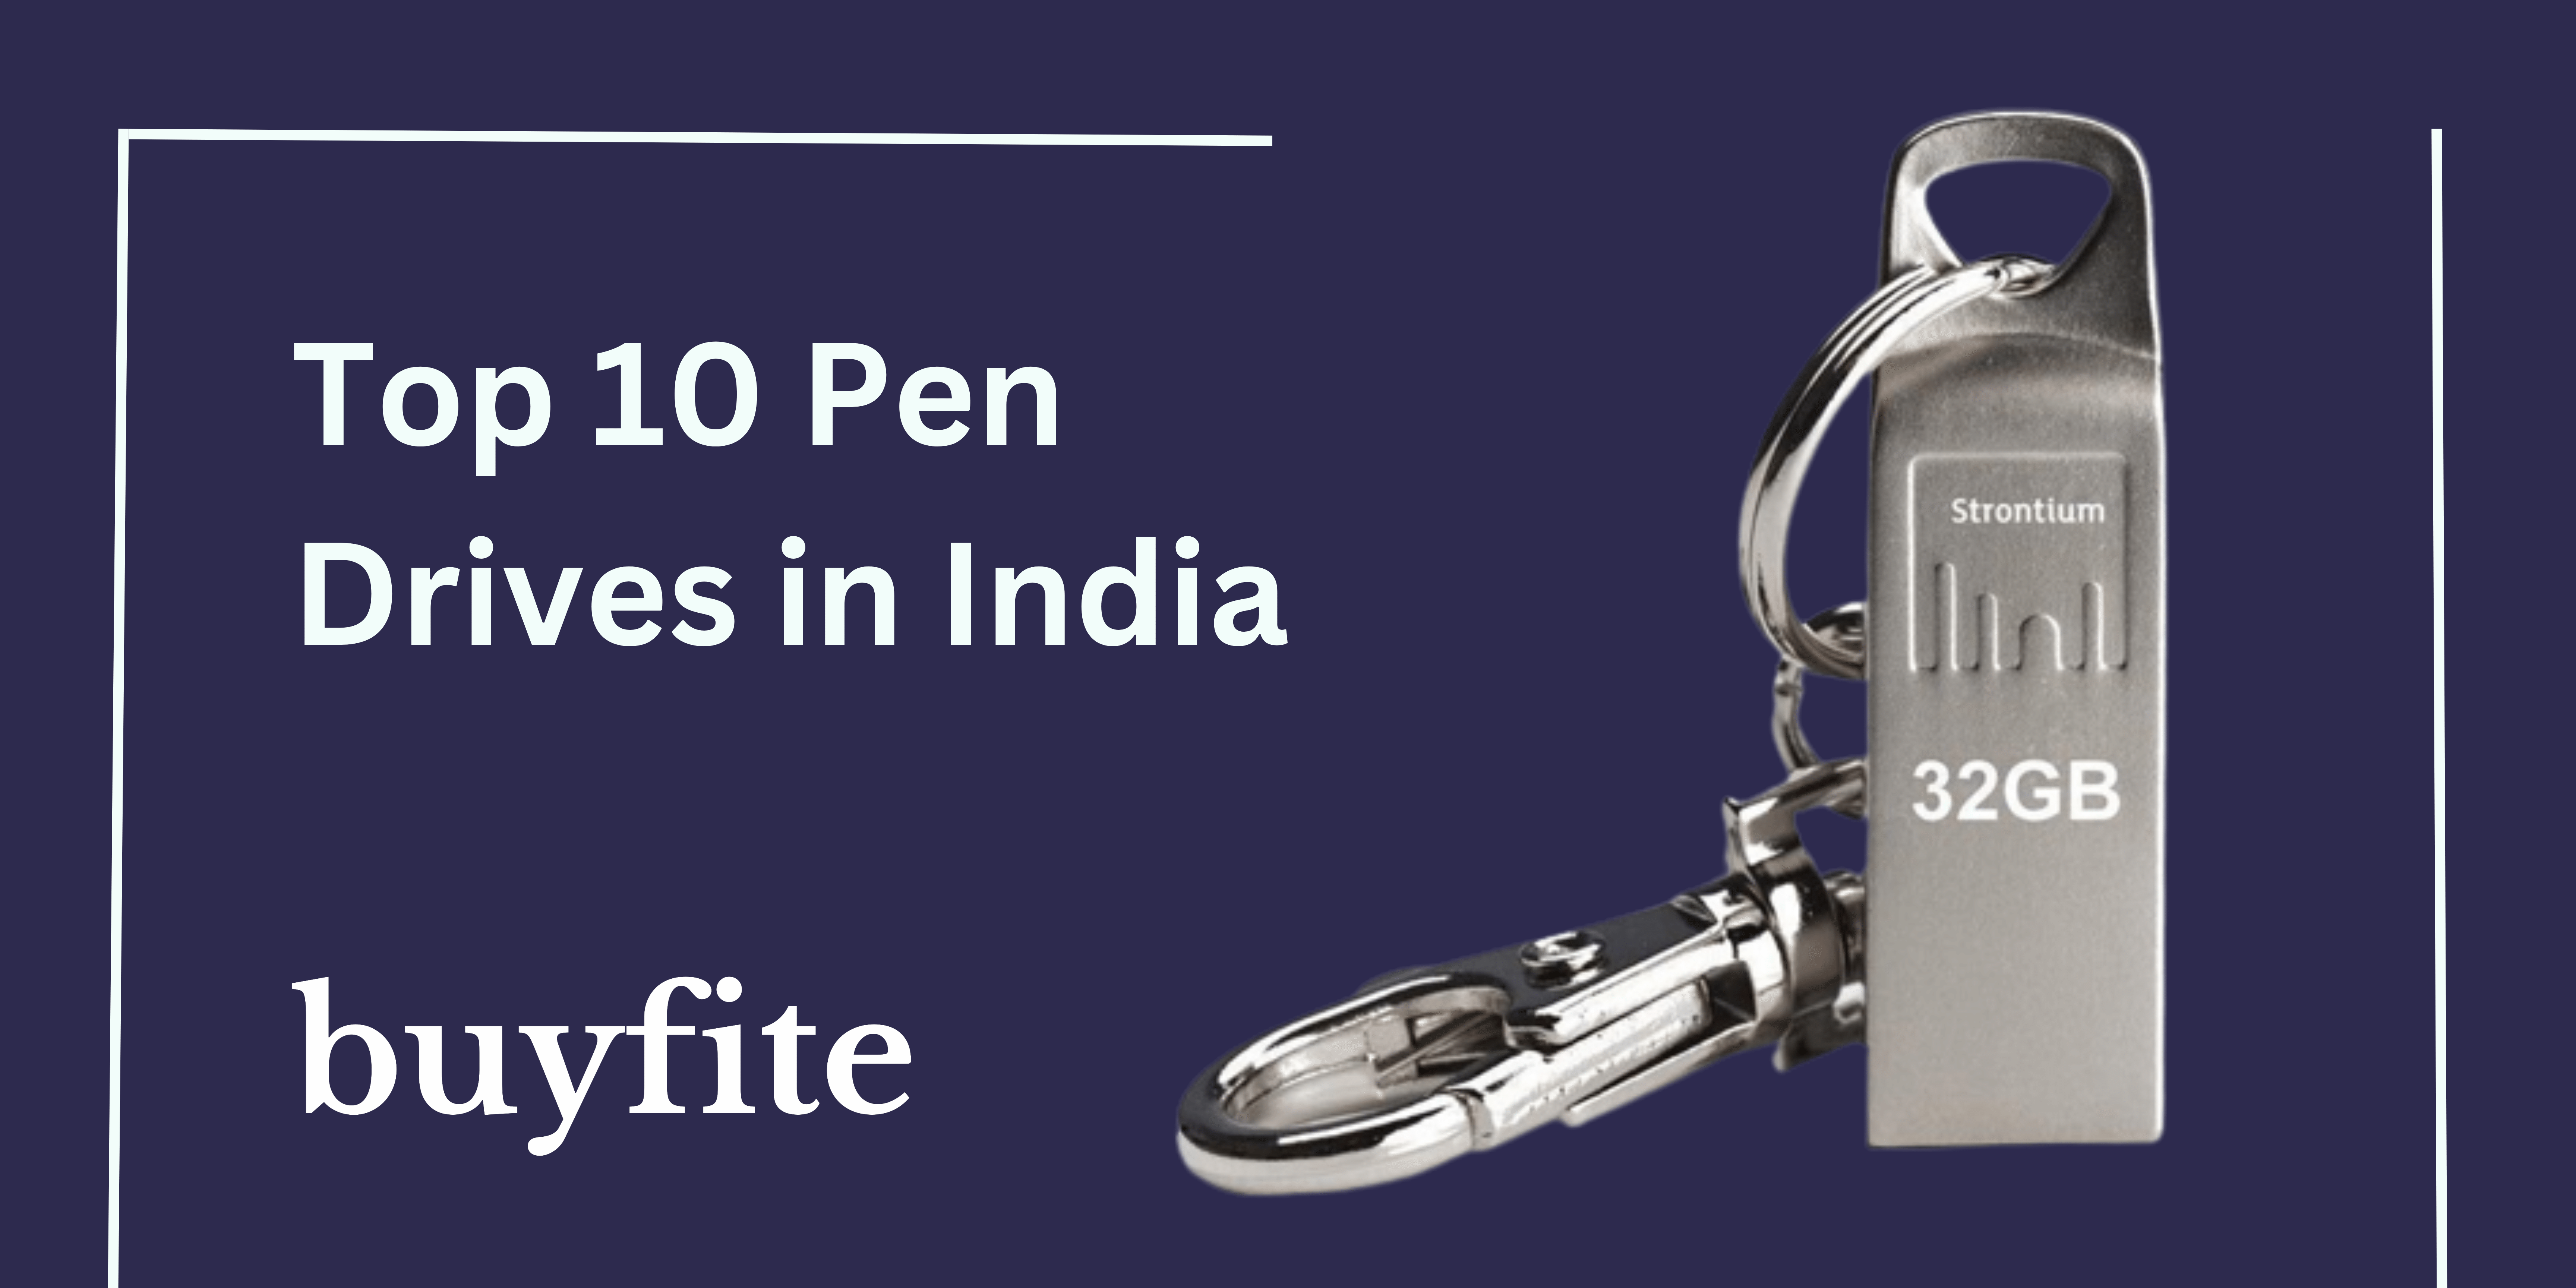 Top 10 Pen Drives in India - buyfite